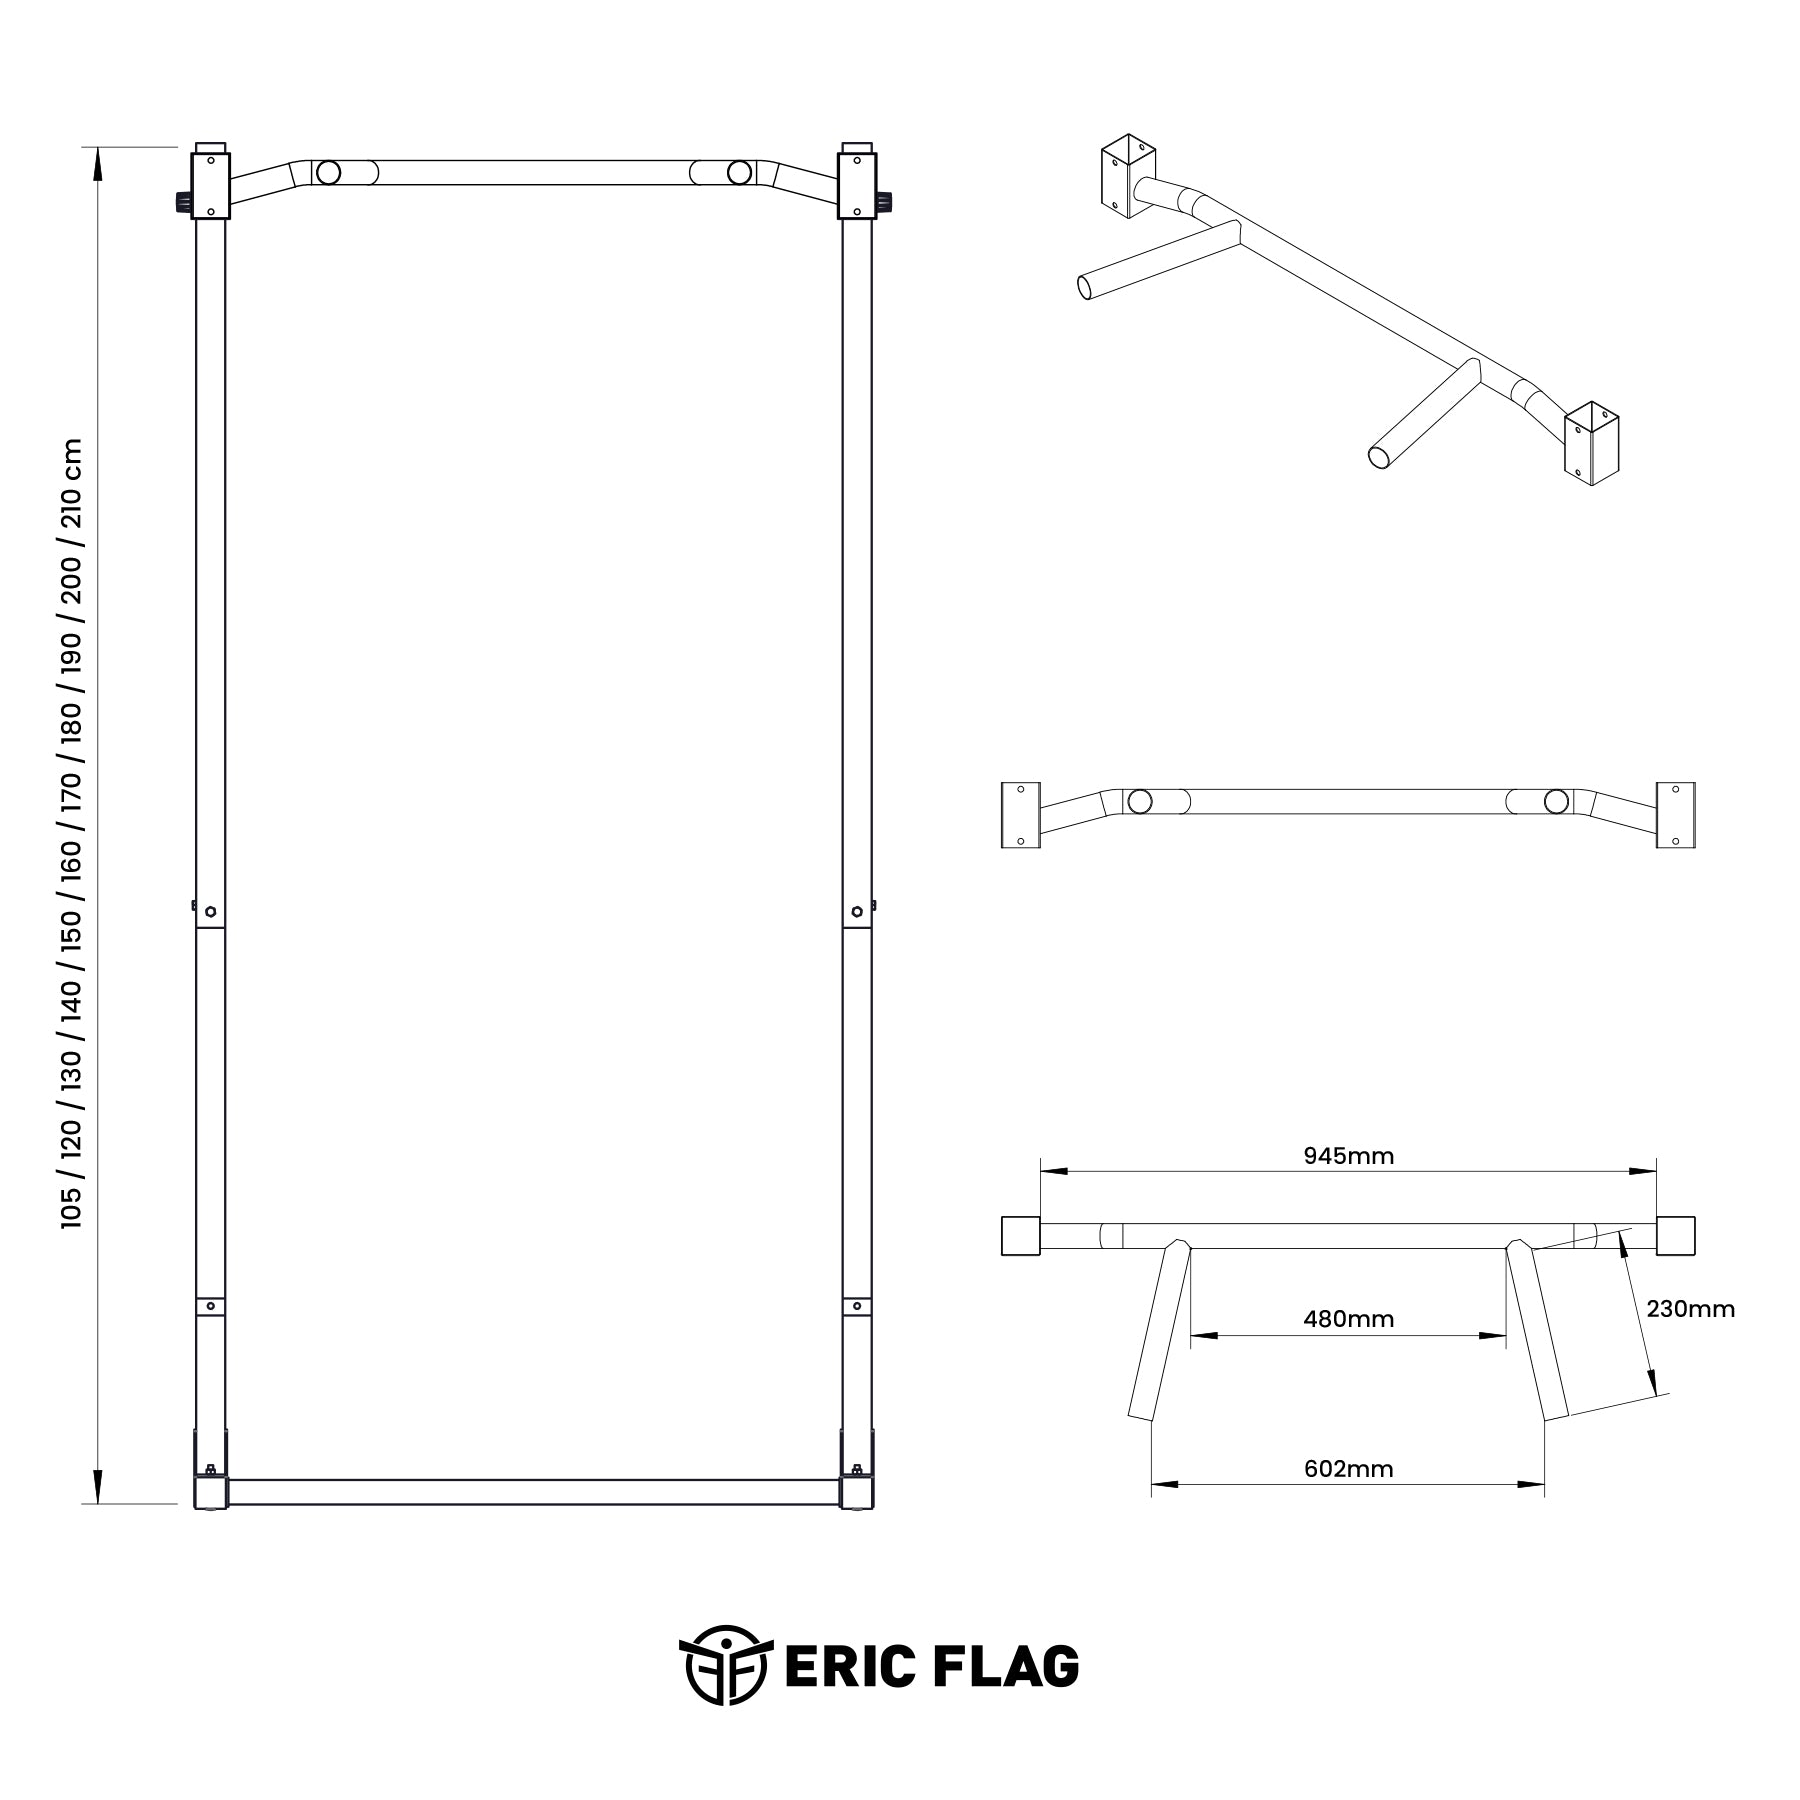 dimensions dips accessory eric flag